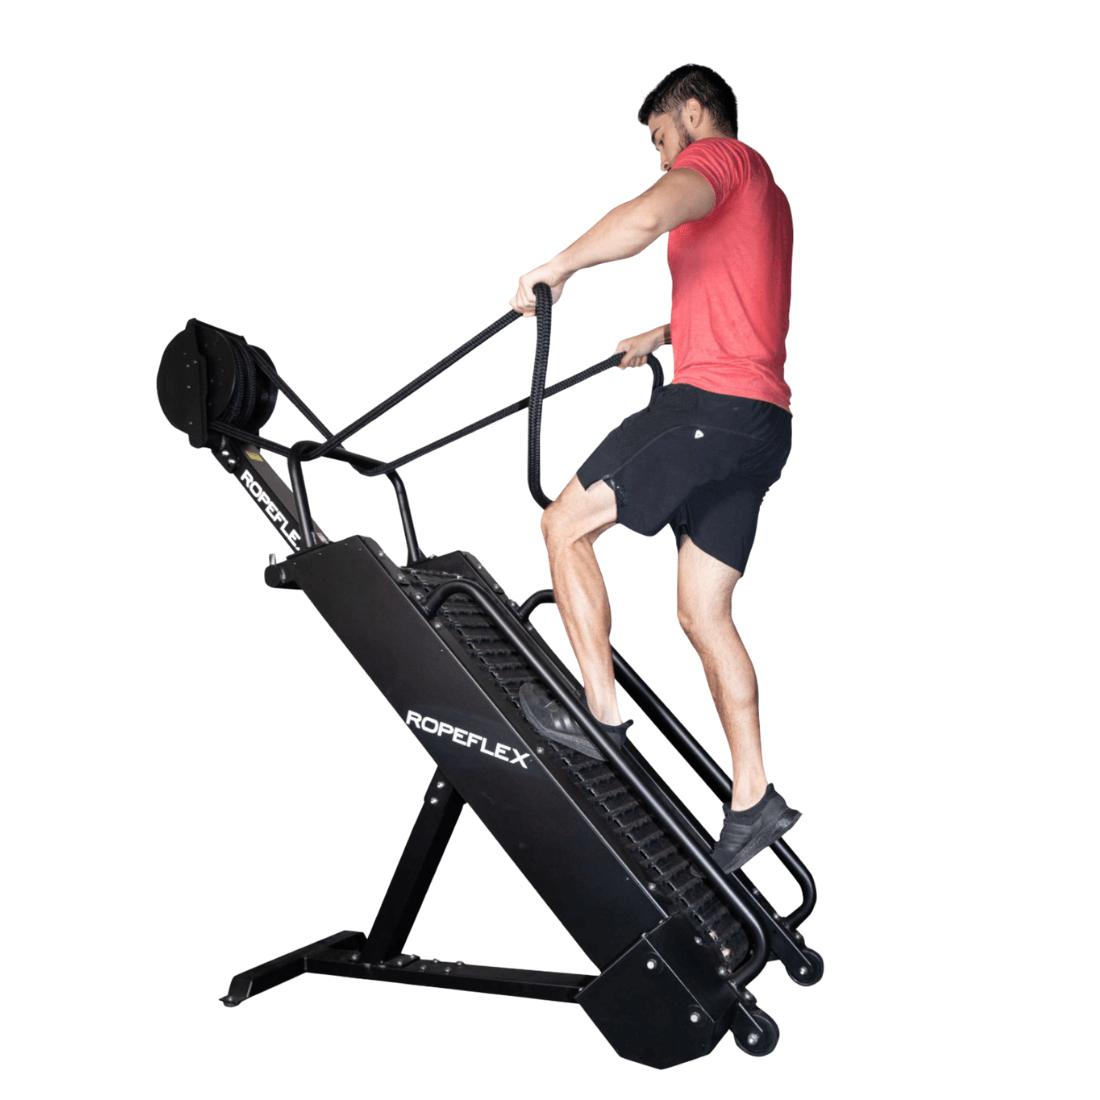 Ropeflex RX4400 Apex Rope Climbing Machine with Angled Resistance